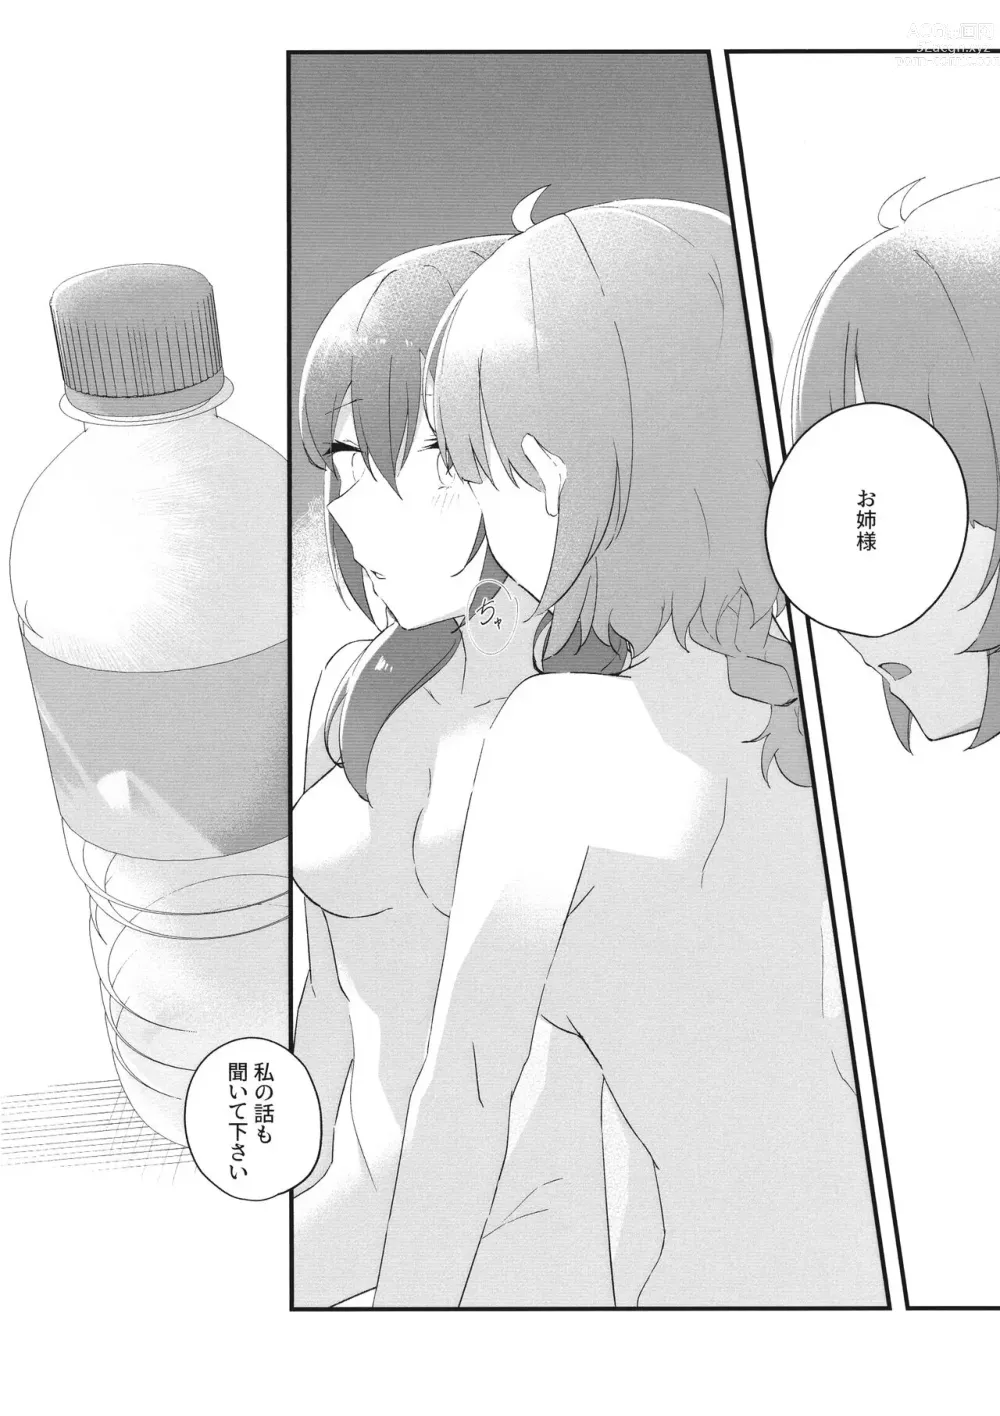 Page 11 of doujinshi Mabataki - without blink, could not find it